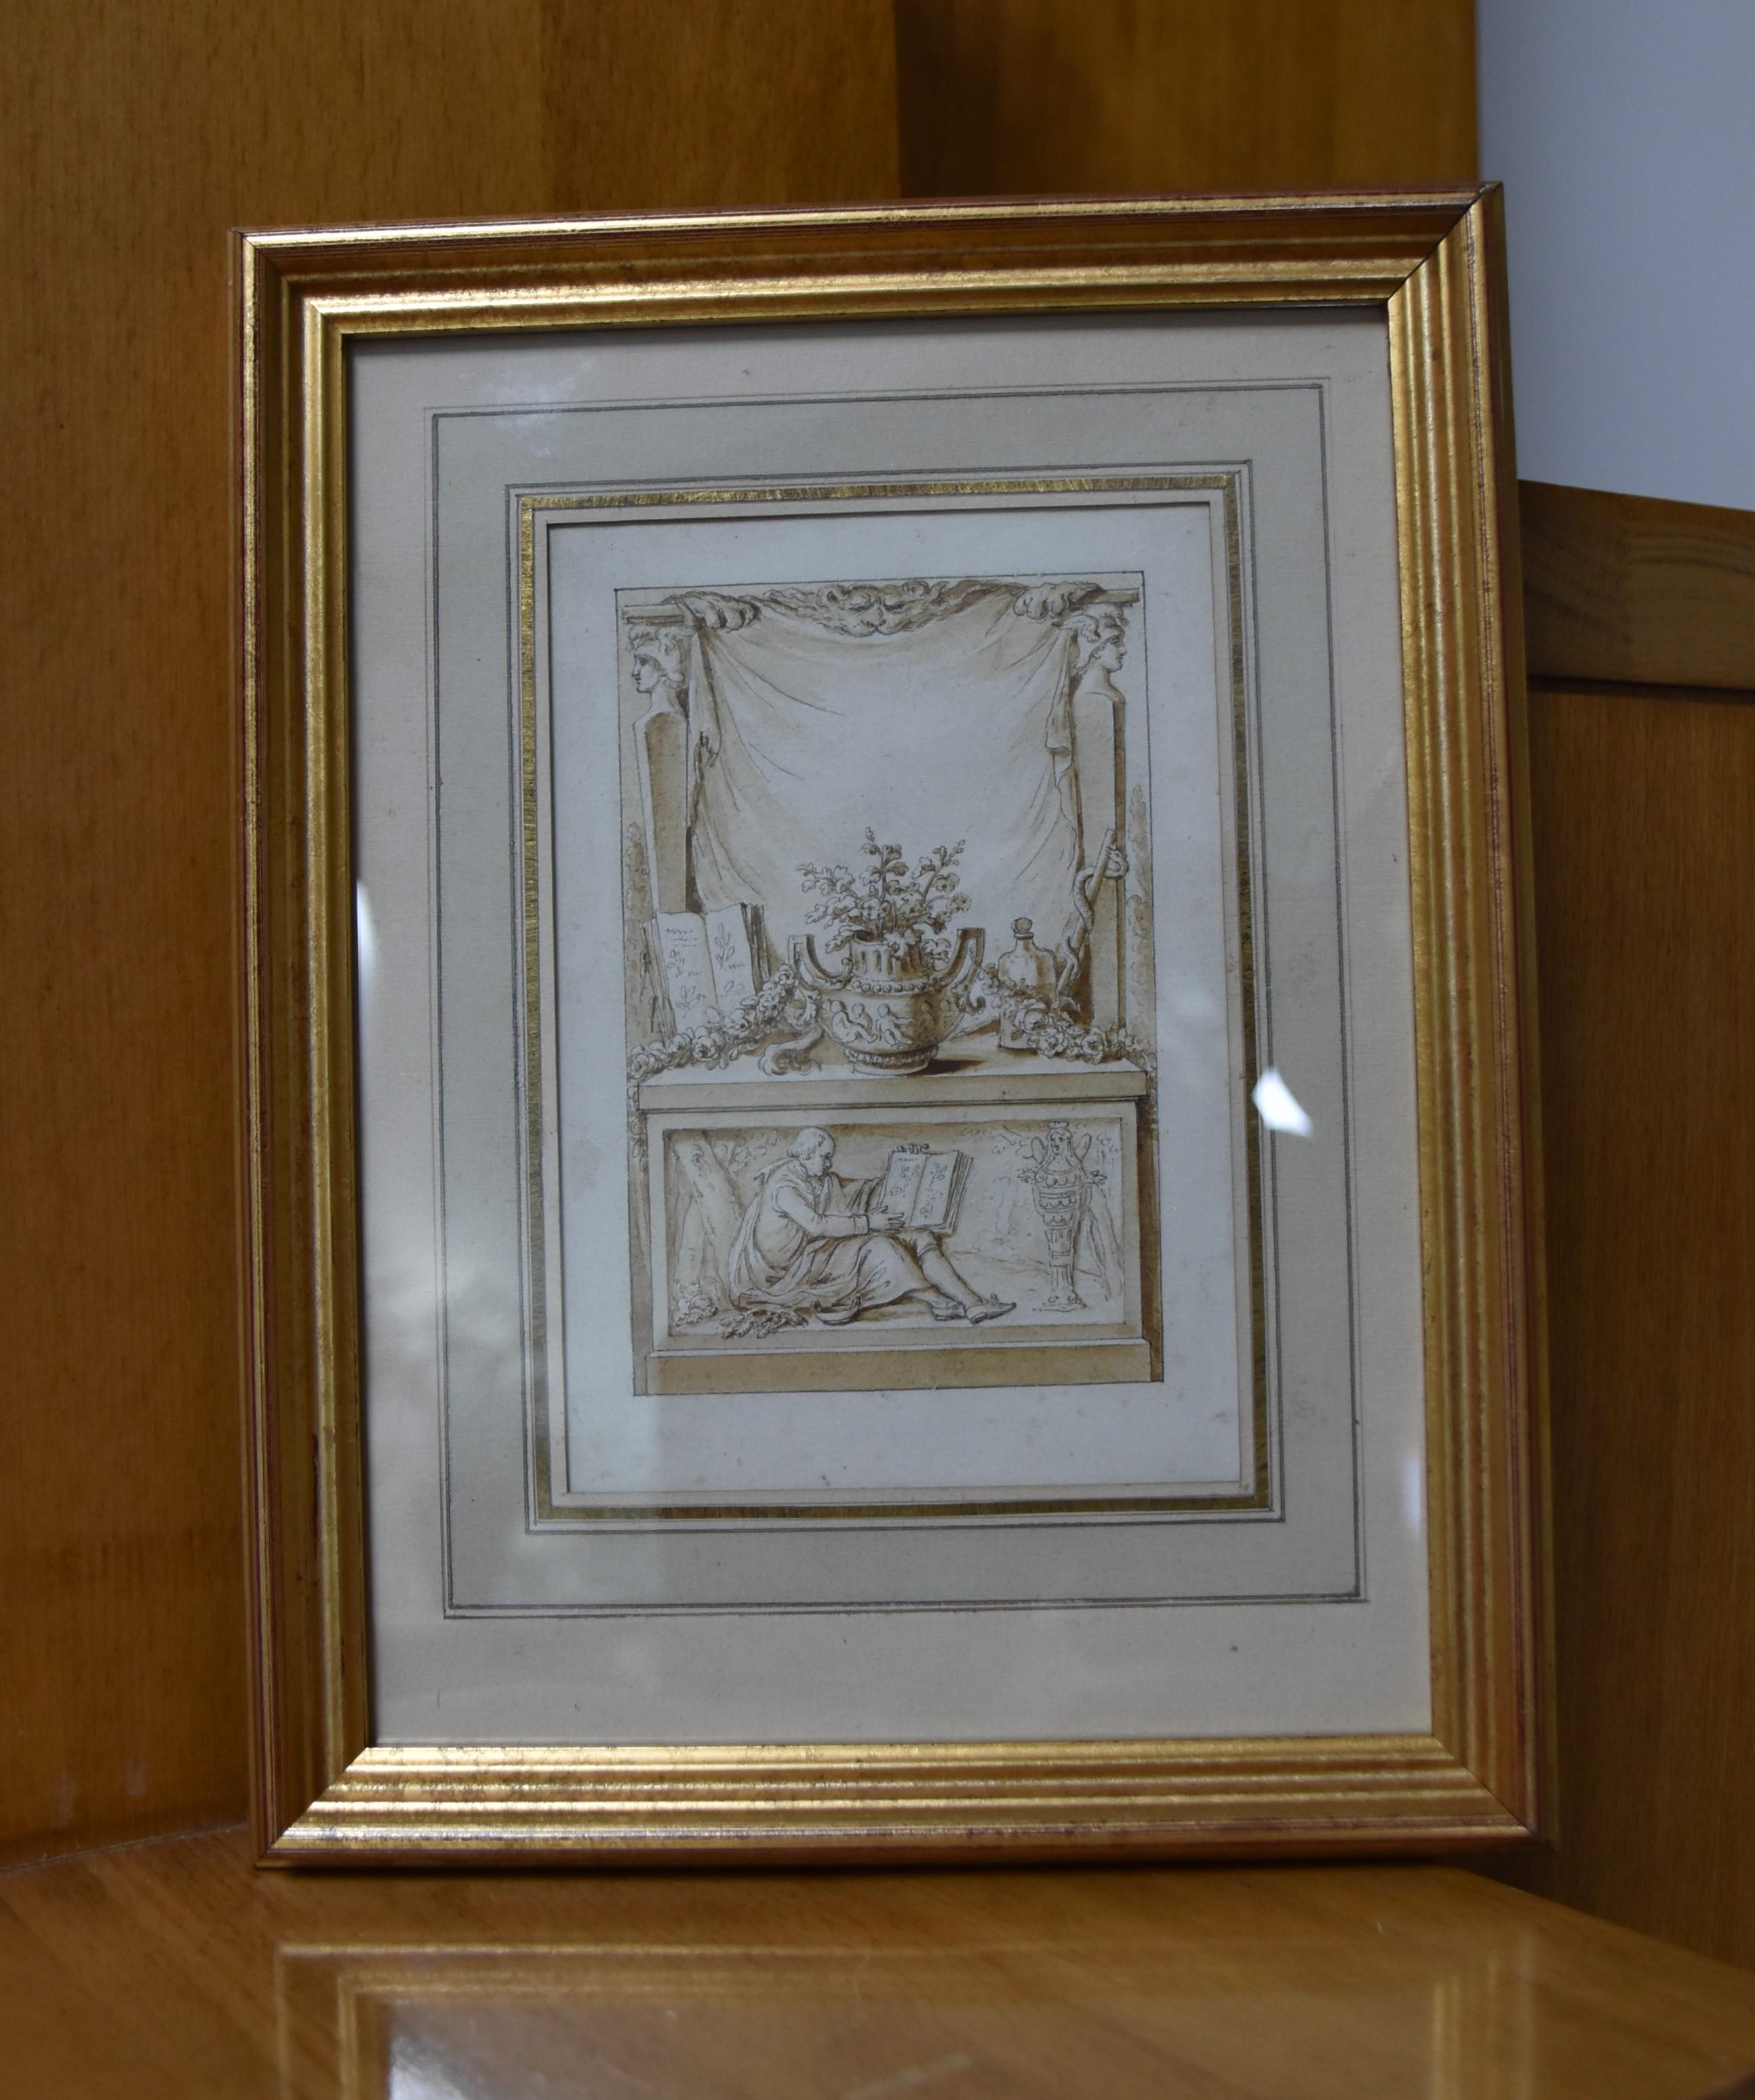 18th century French Neo Classical school, Study for frontispiece, drawing 4